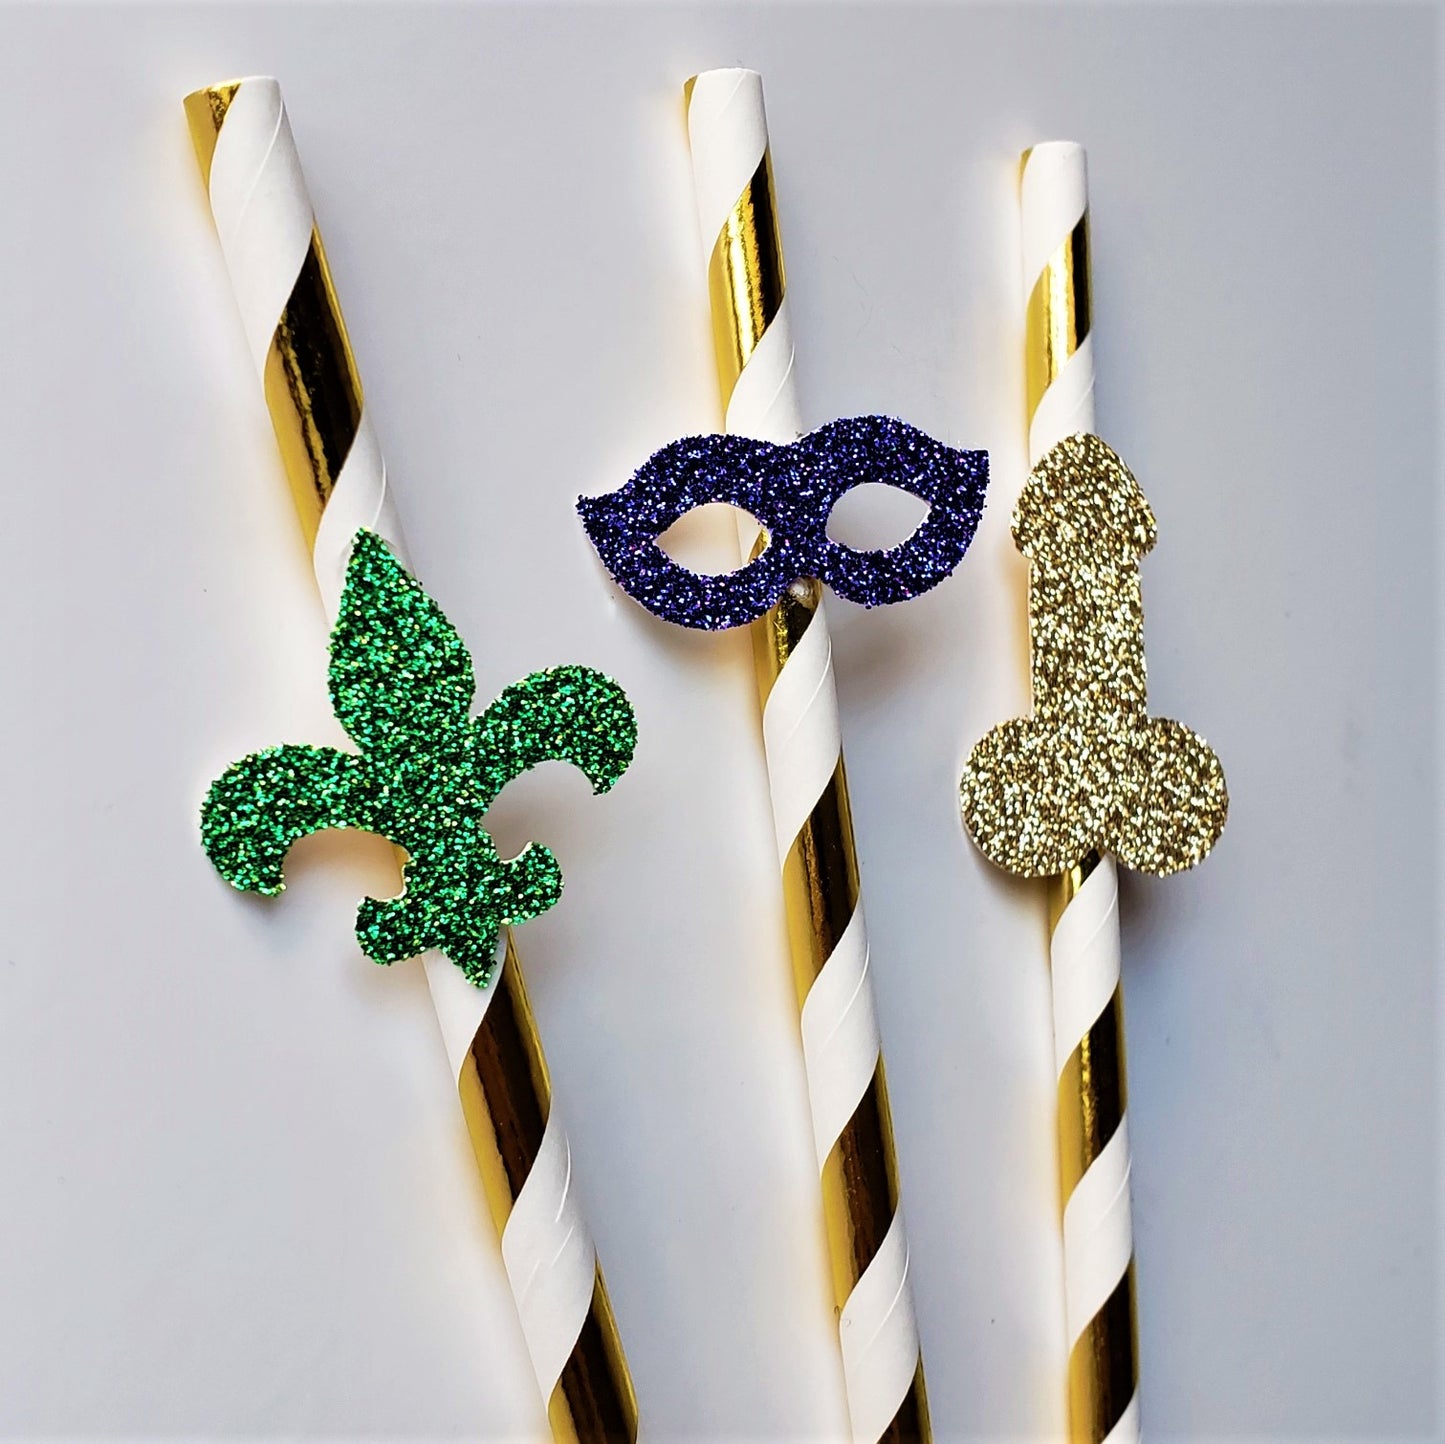 New Orleans Bachelorette Party Straws